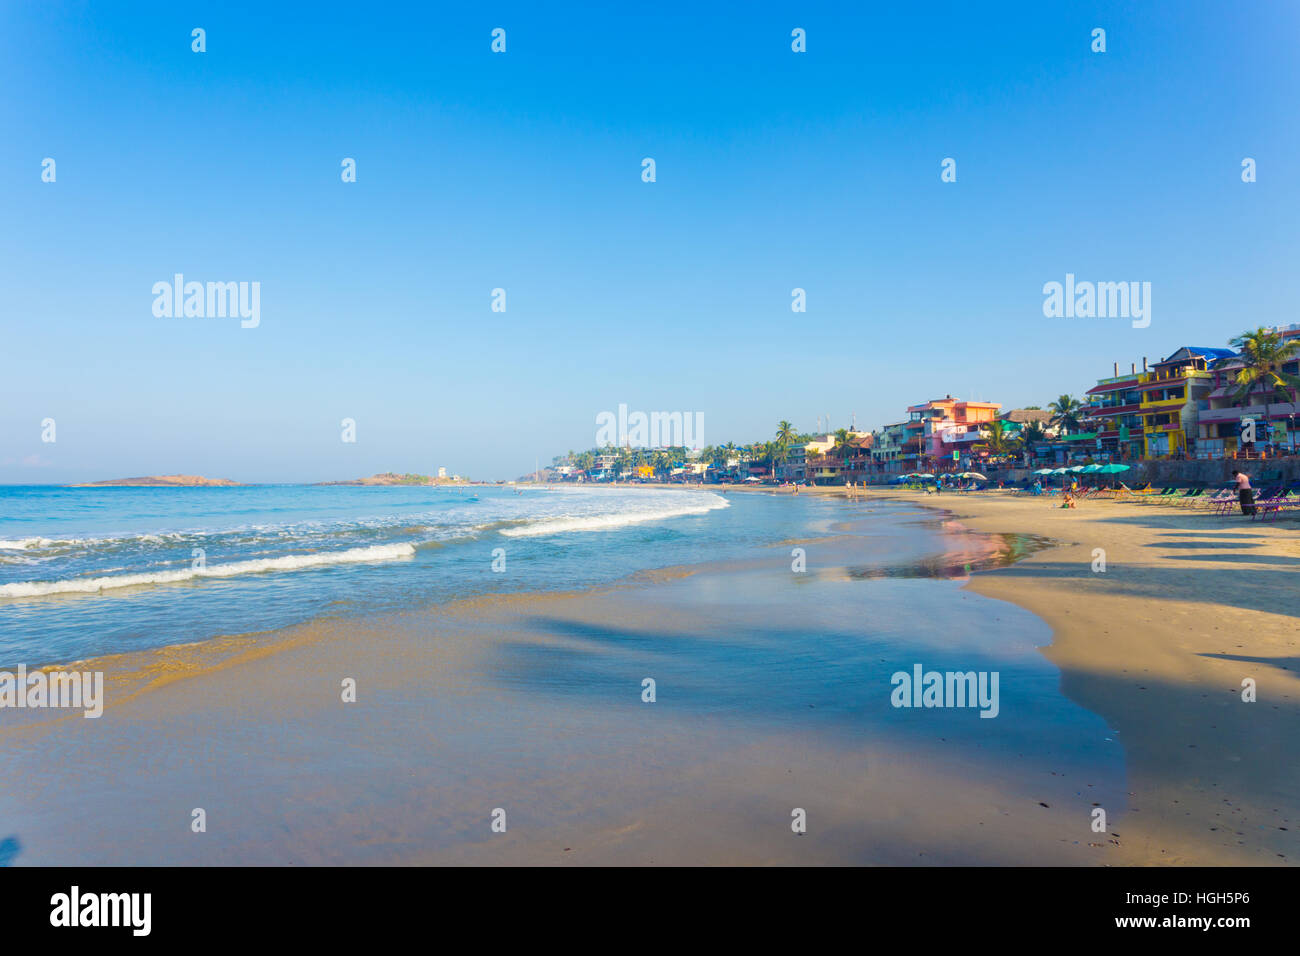 Hotels line the waterfront above the sand beach and ocean waves at a tourist town in Kerala, India. Horizontal Stock Photo